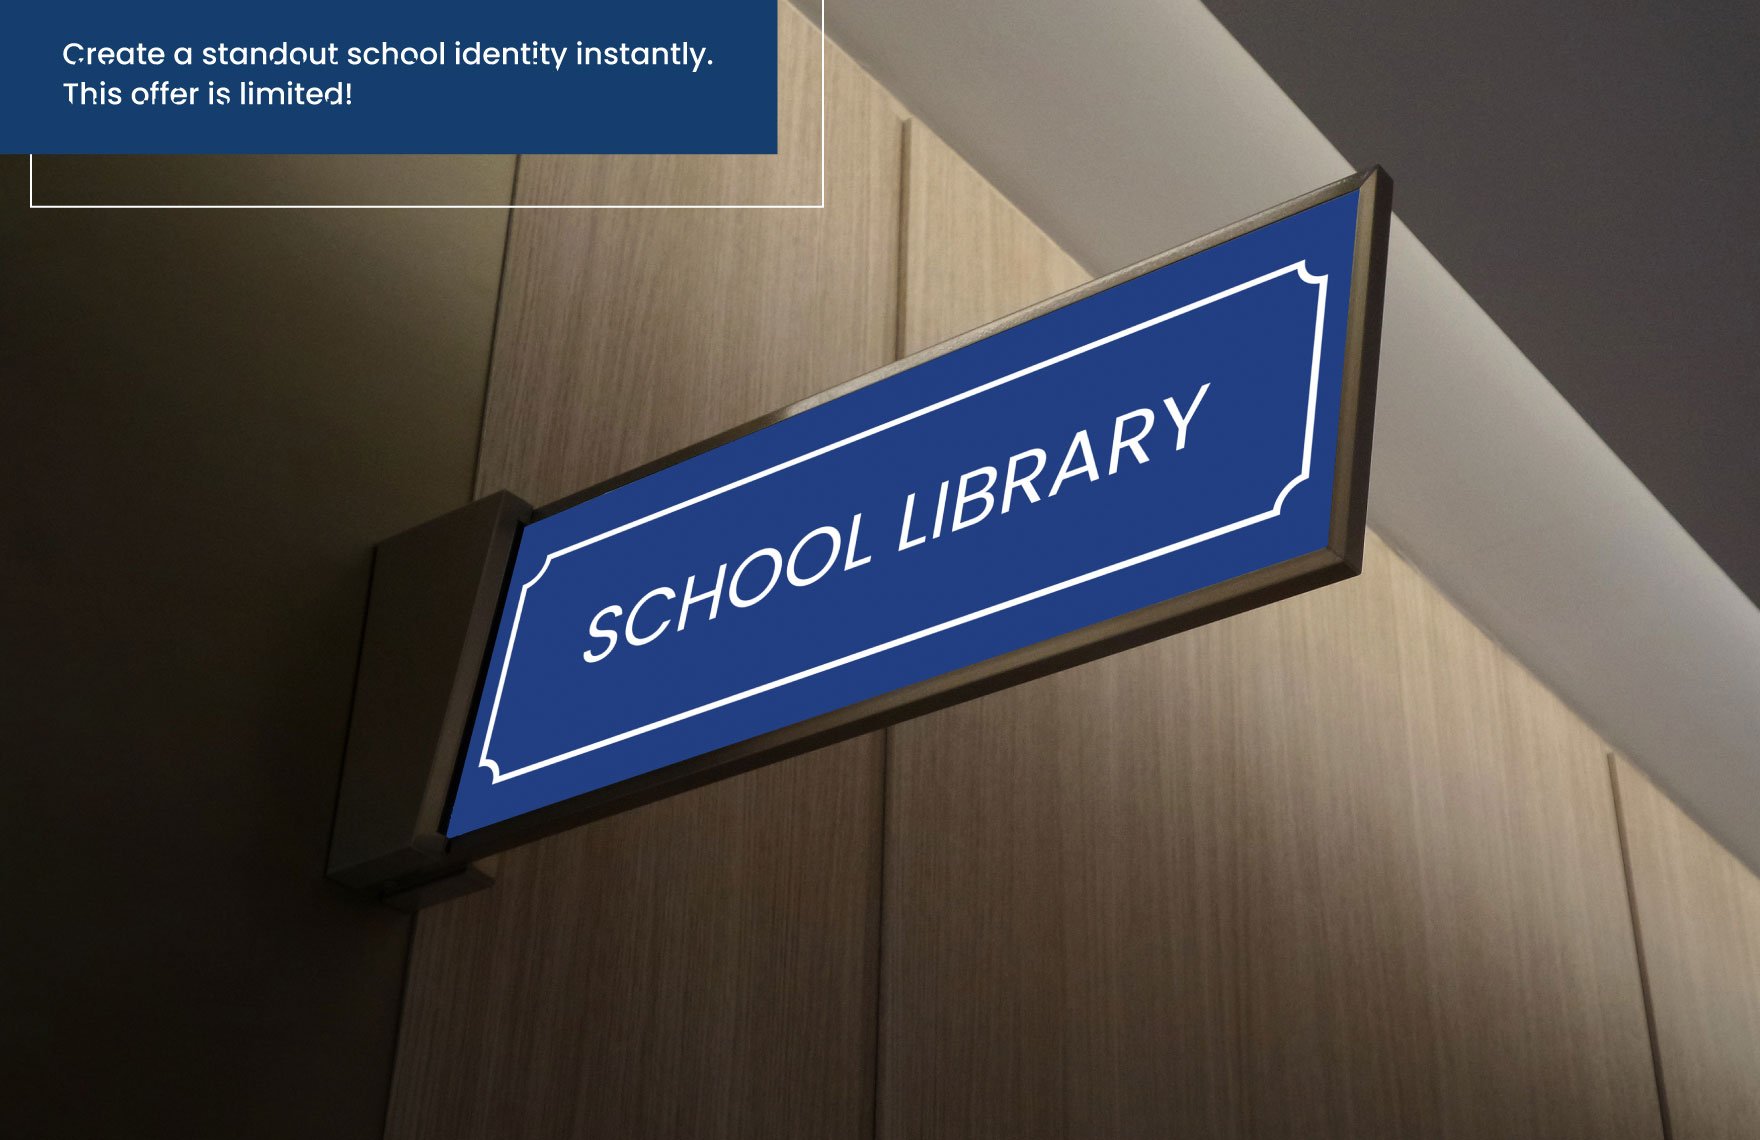 School Library Sign Template